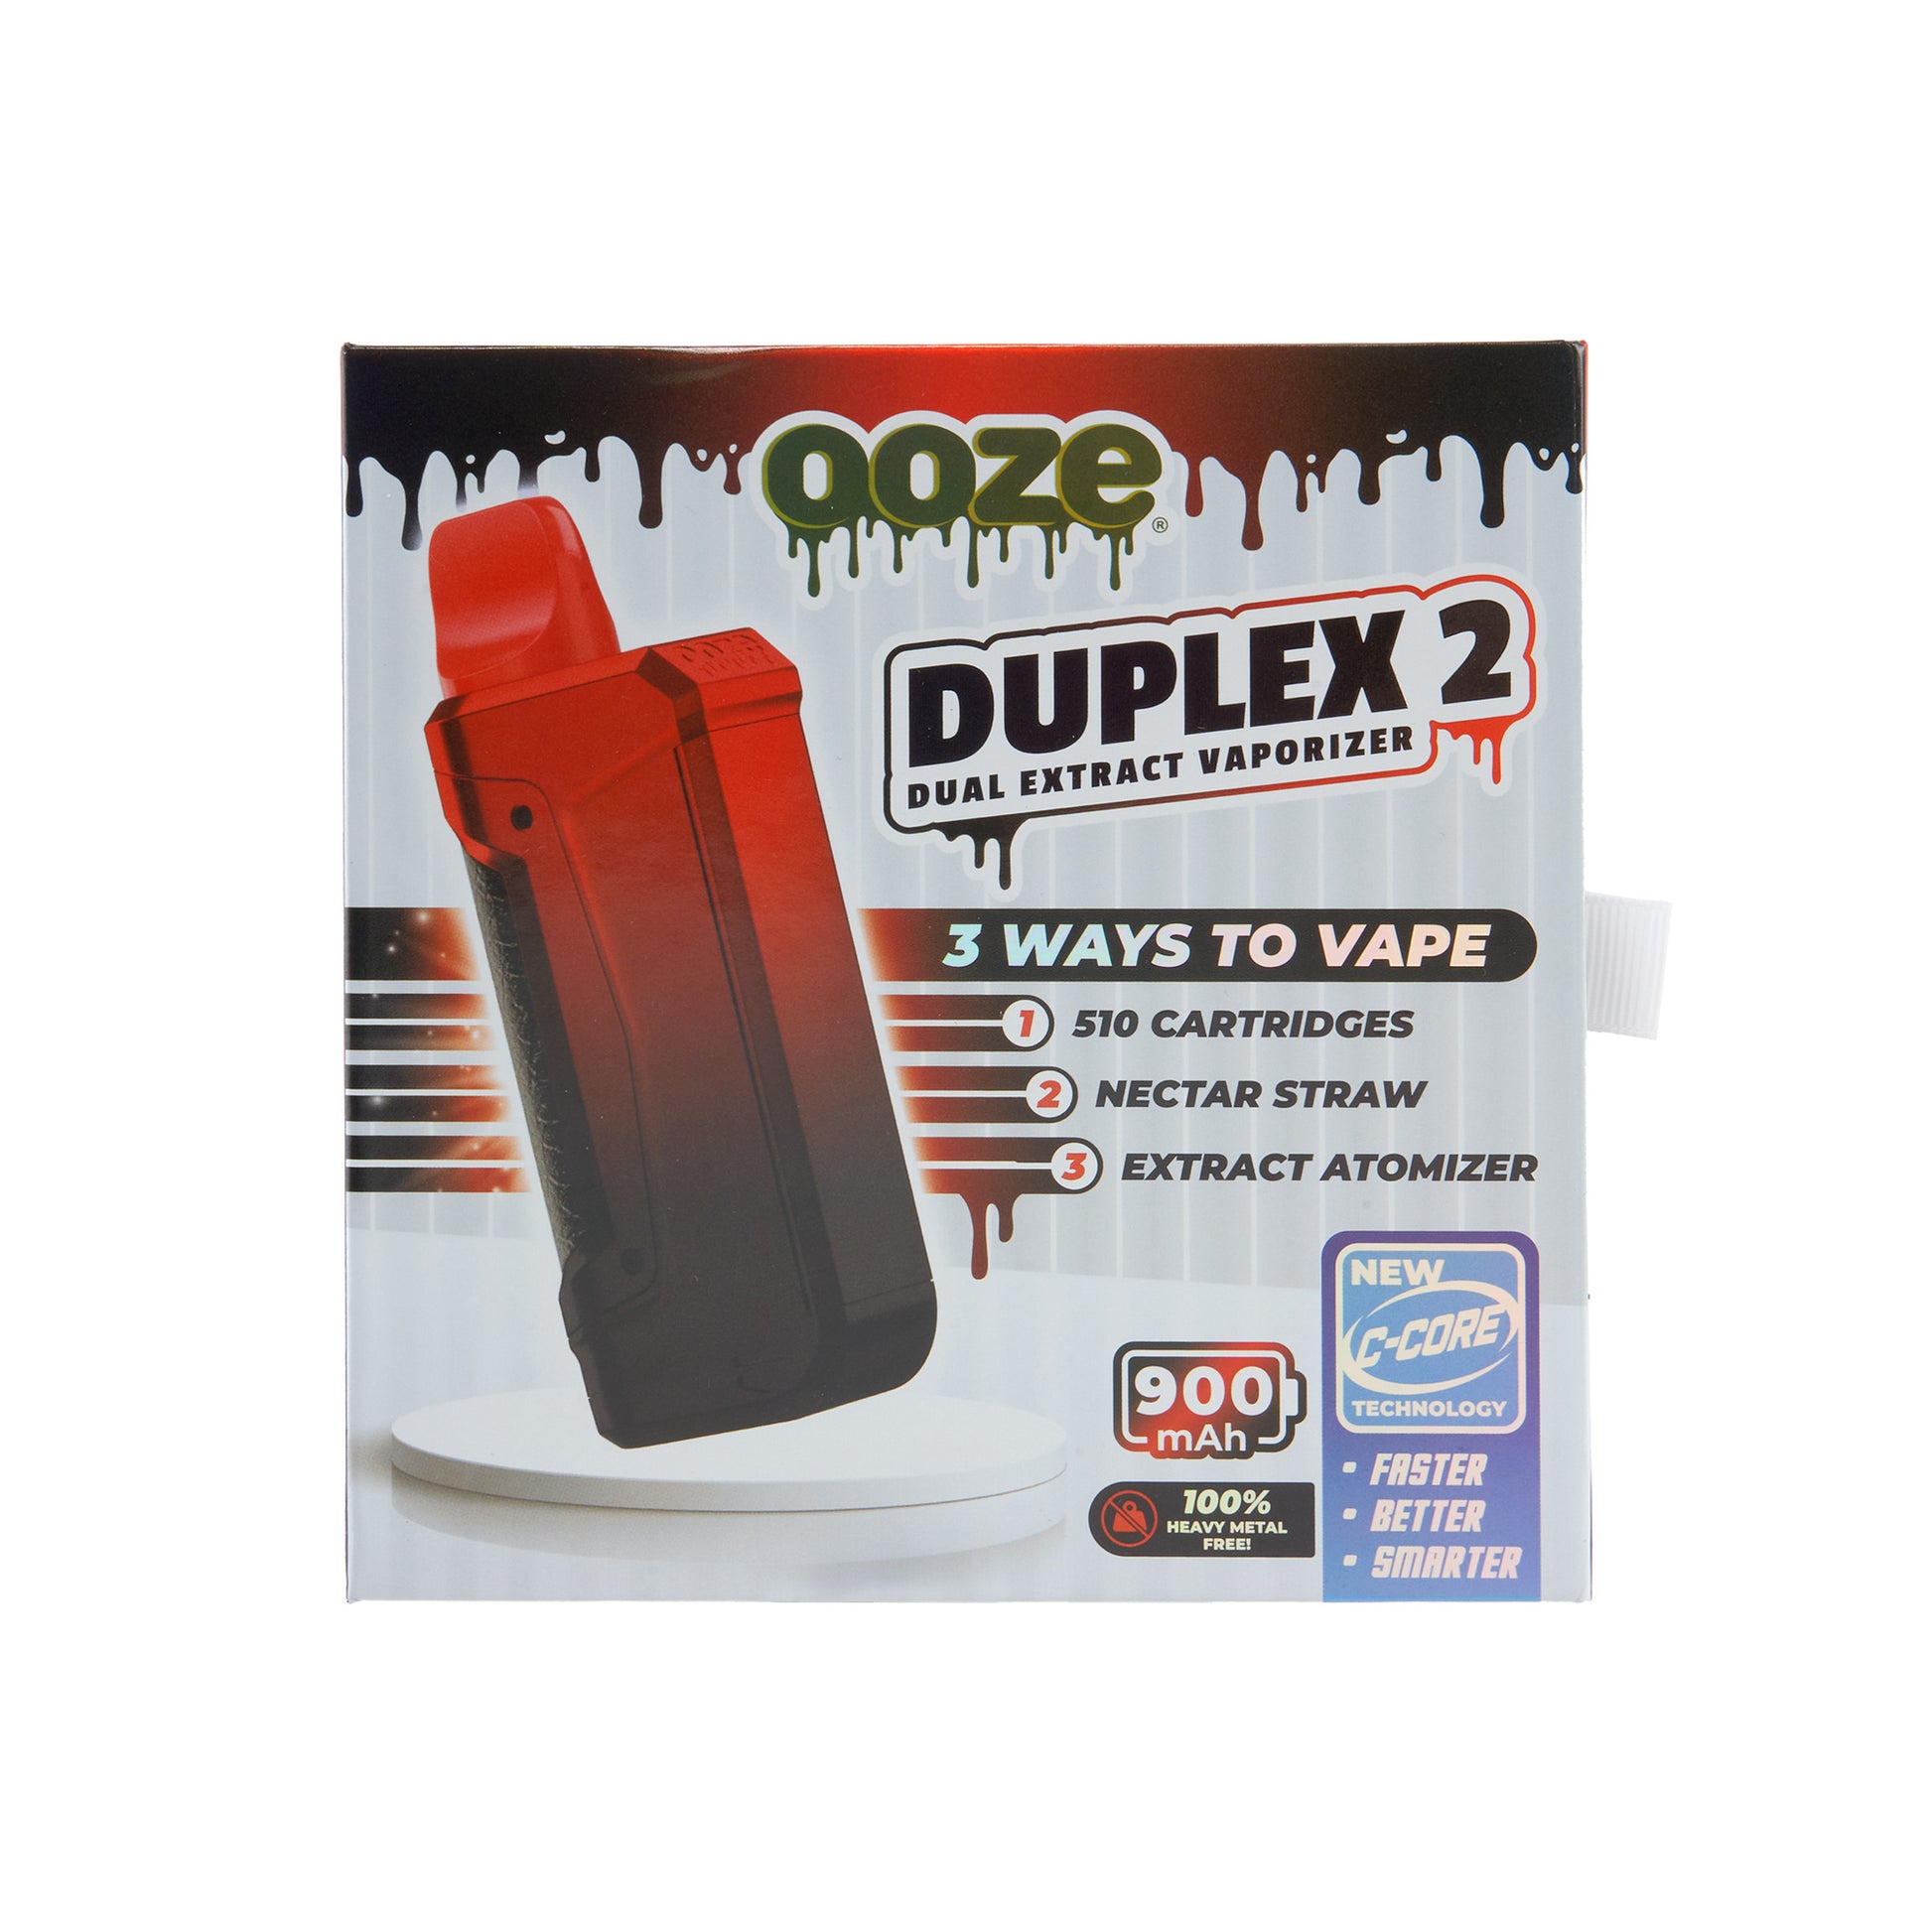 The box for The midnight sun Ooze Duplex 2 extract vaporizer